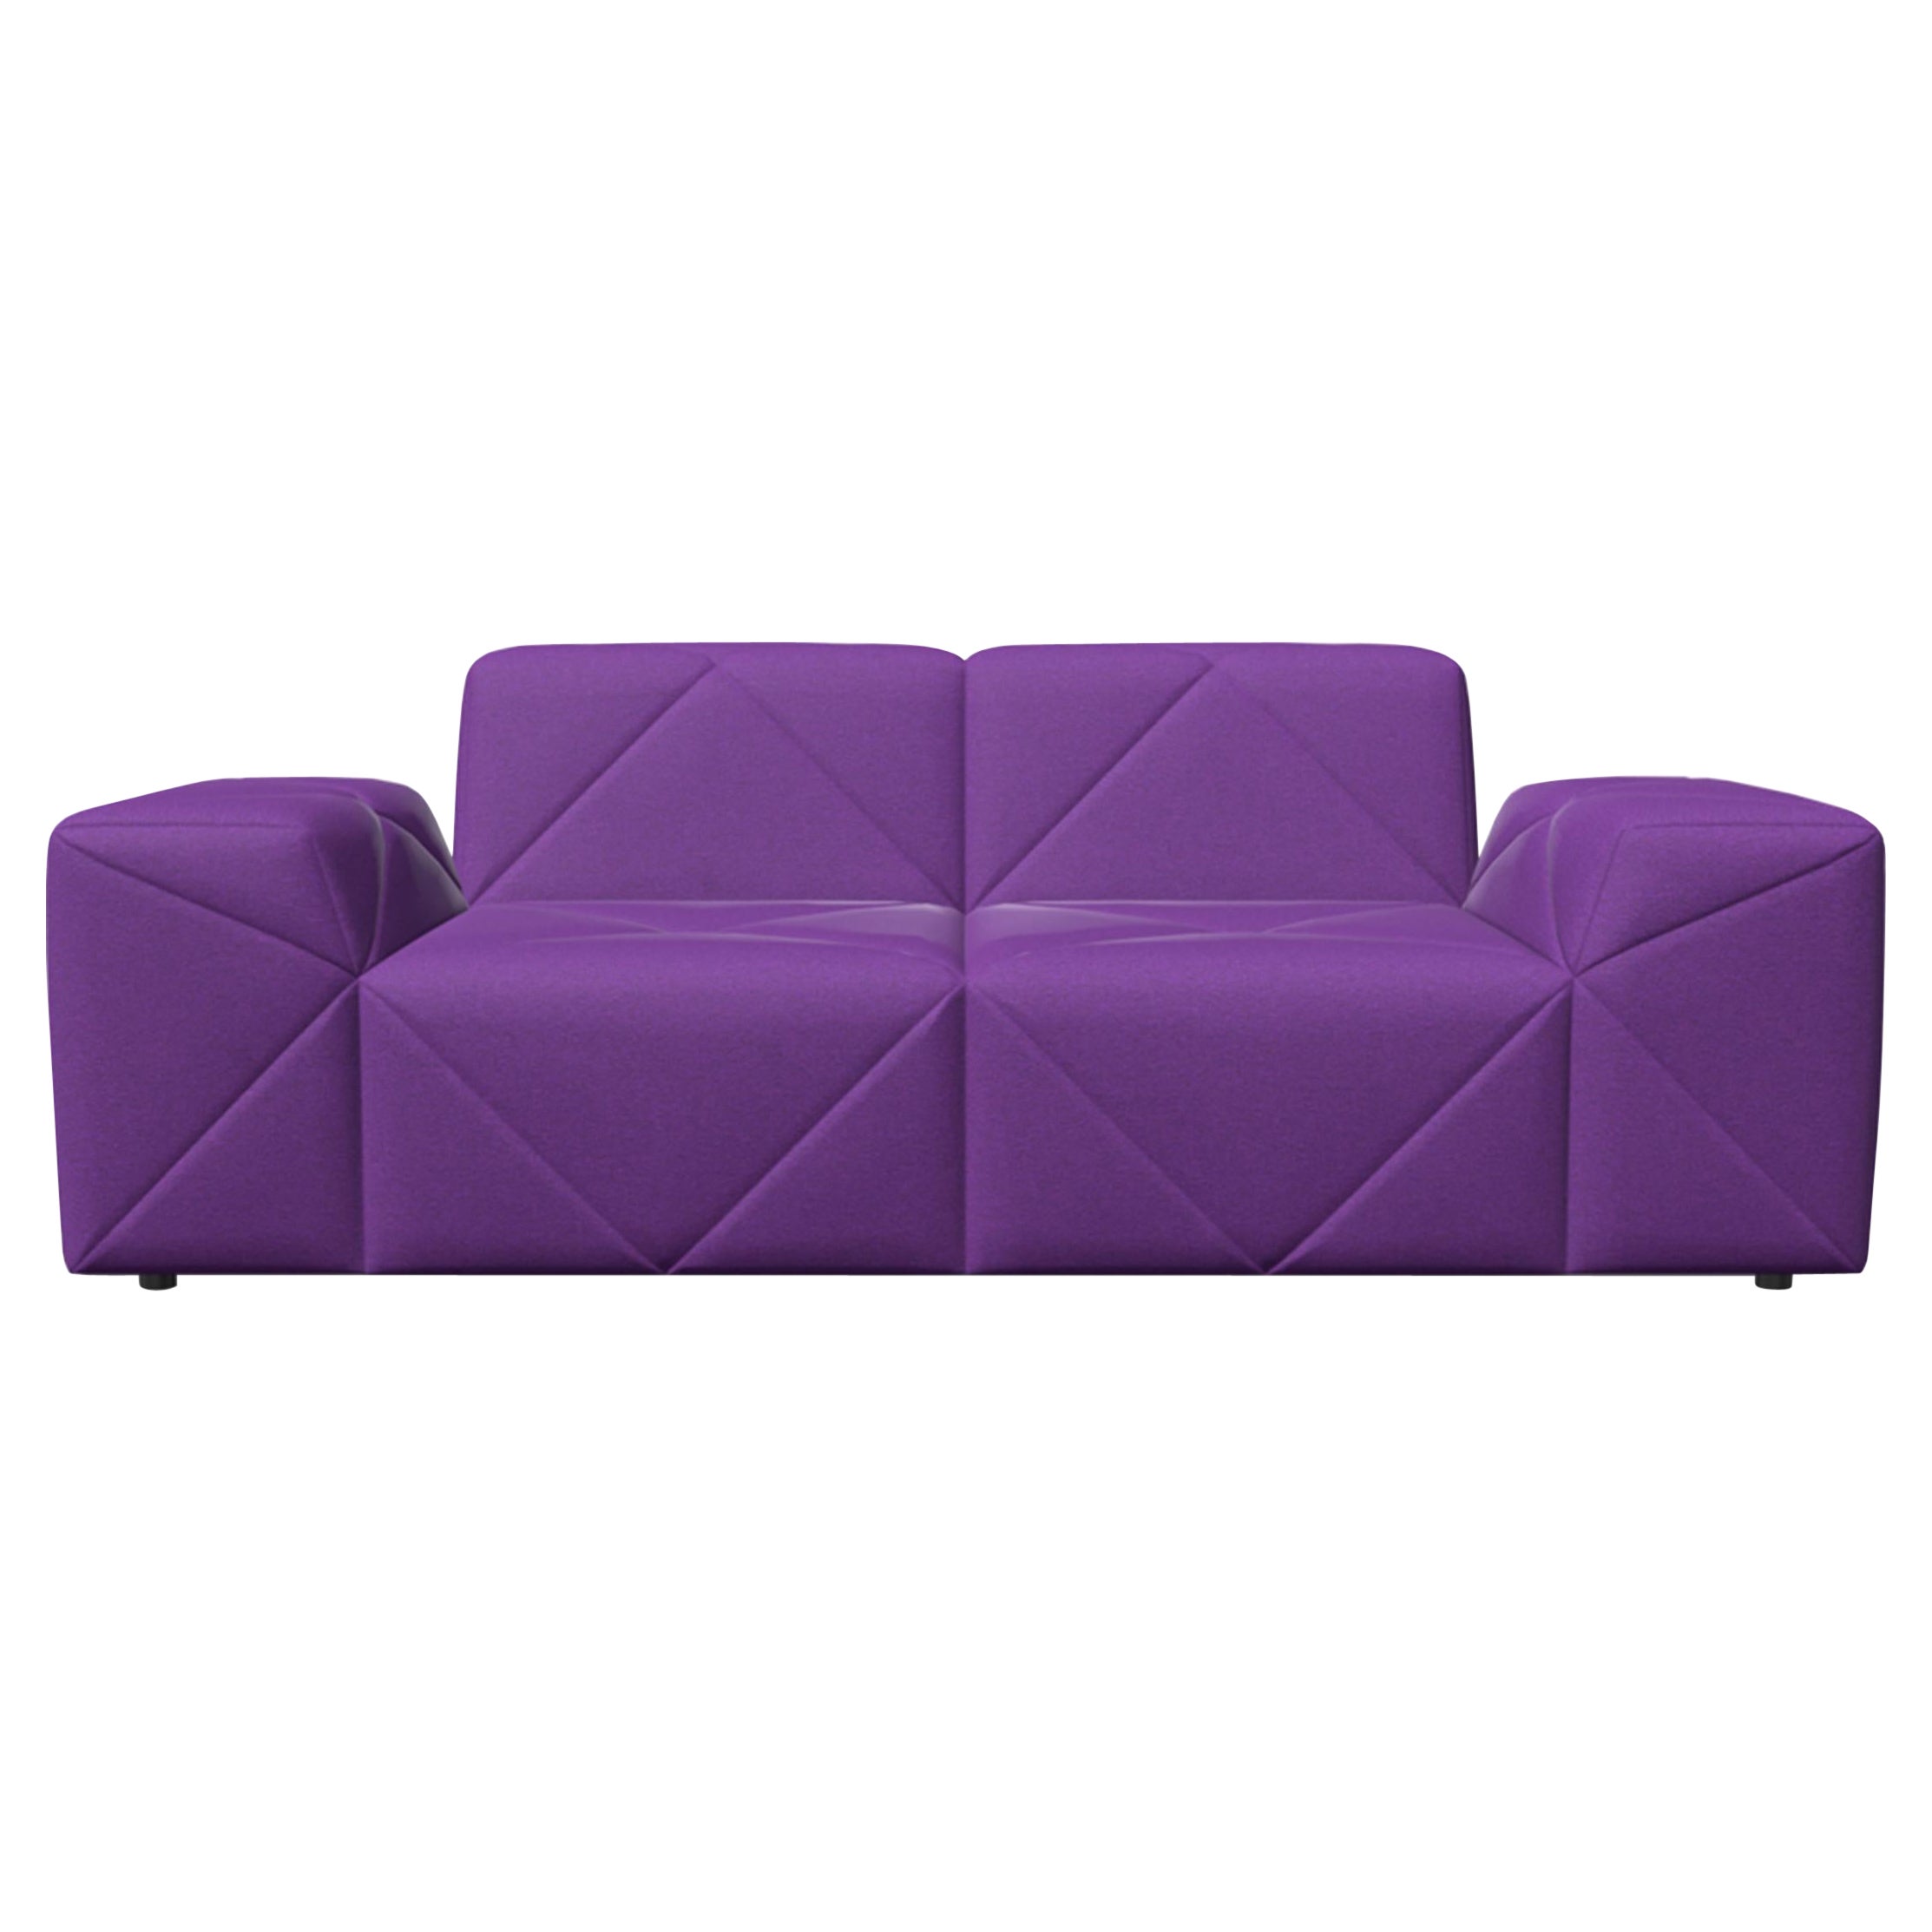 Moooi BFF Double Seater DE01 Low Sofa in Divina 3, 666 Purple Upholstery